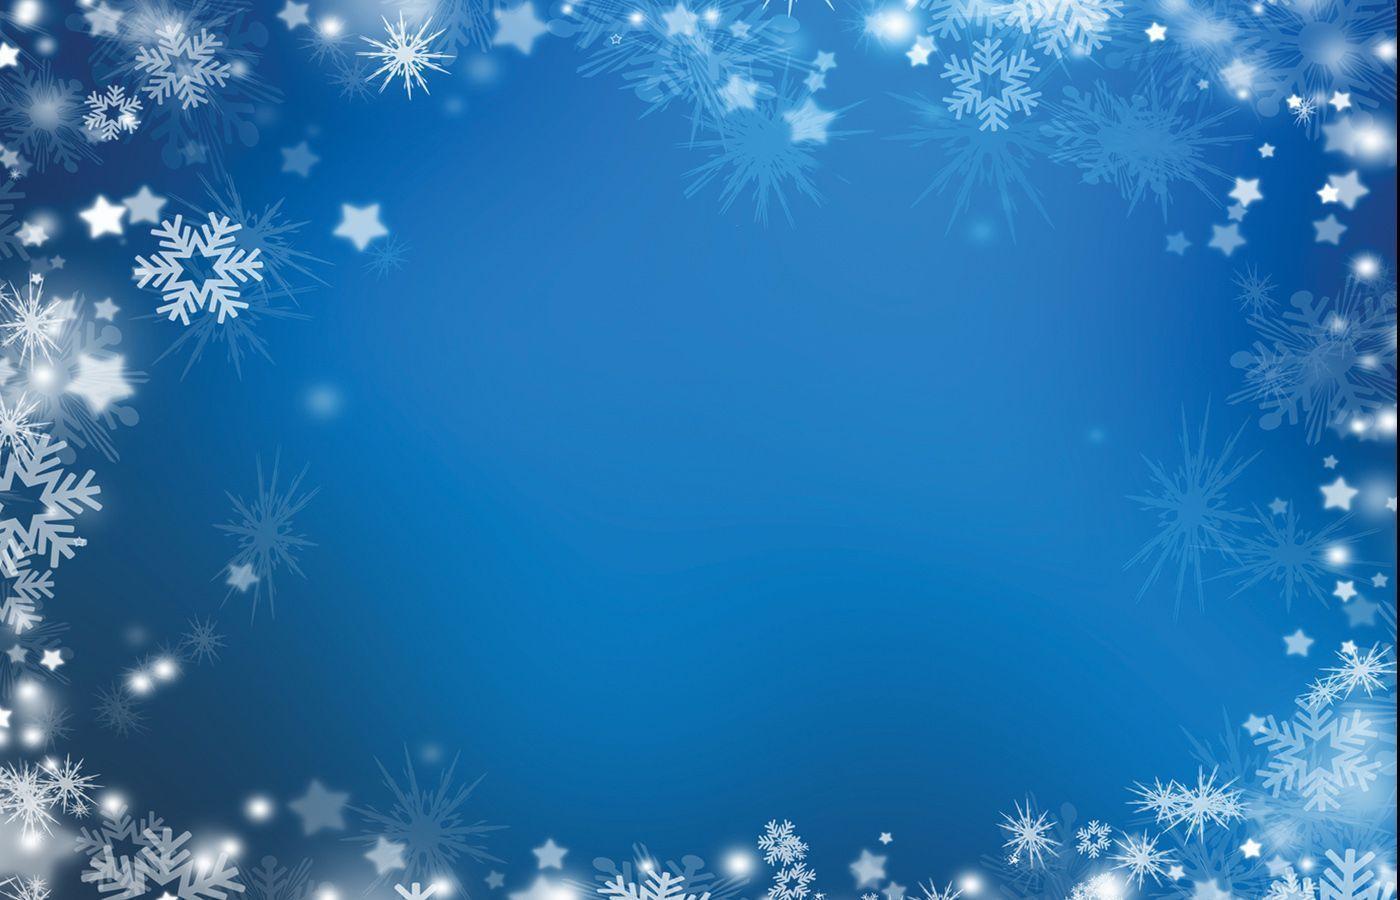 Holiday Backgrounds - Wallpaper Cave